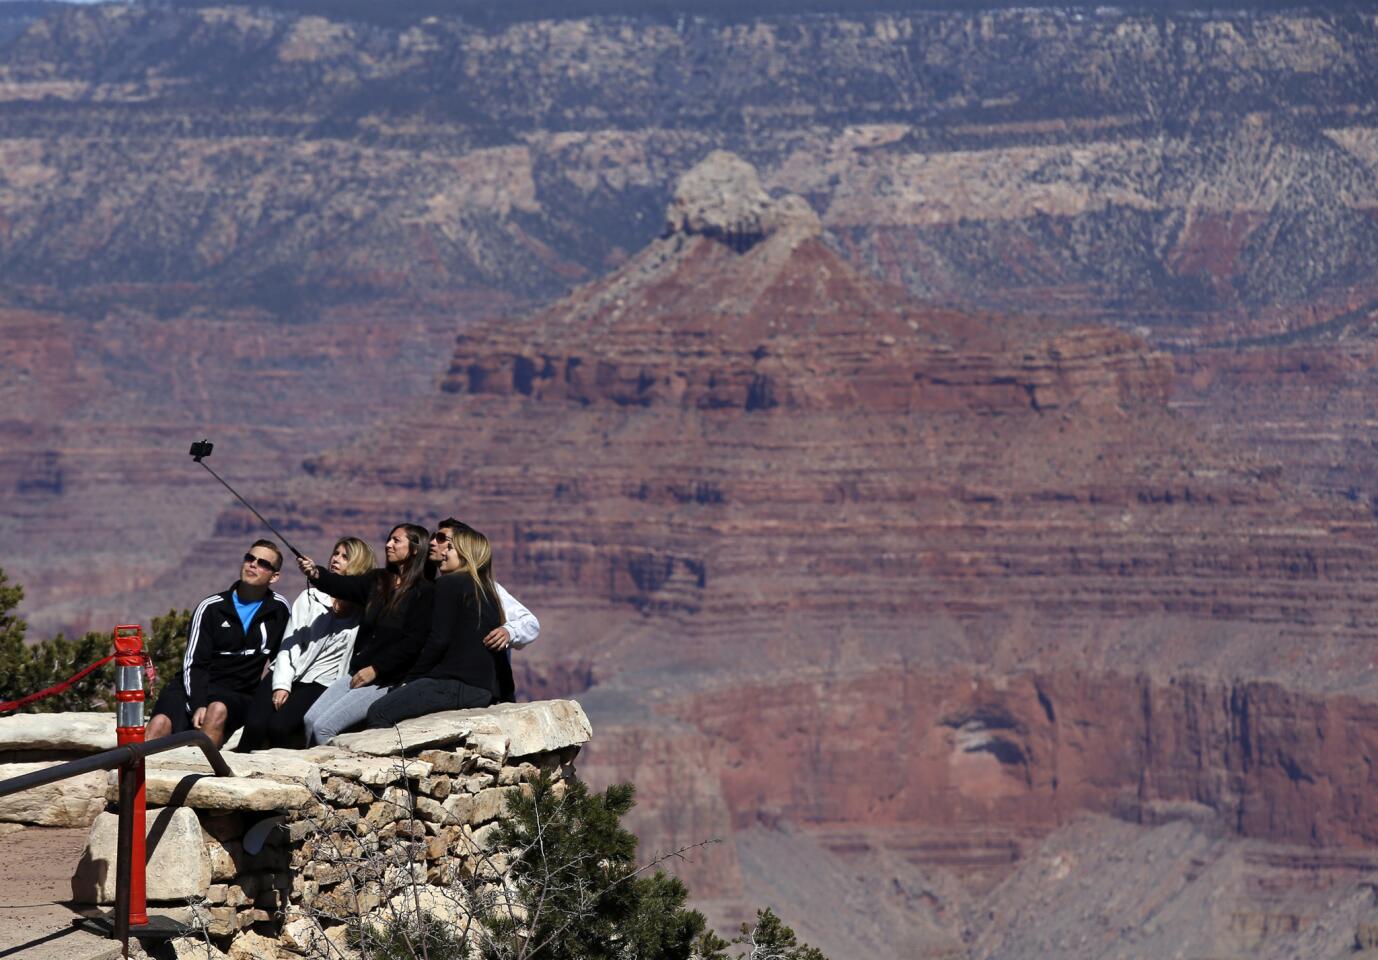 Selfie sticks are popular nowadays at the Grand Canyon as visitors capture pictures of themselves against the famous backdrop.